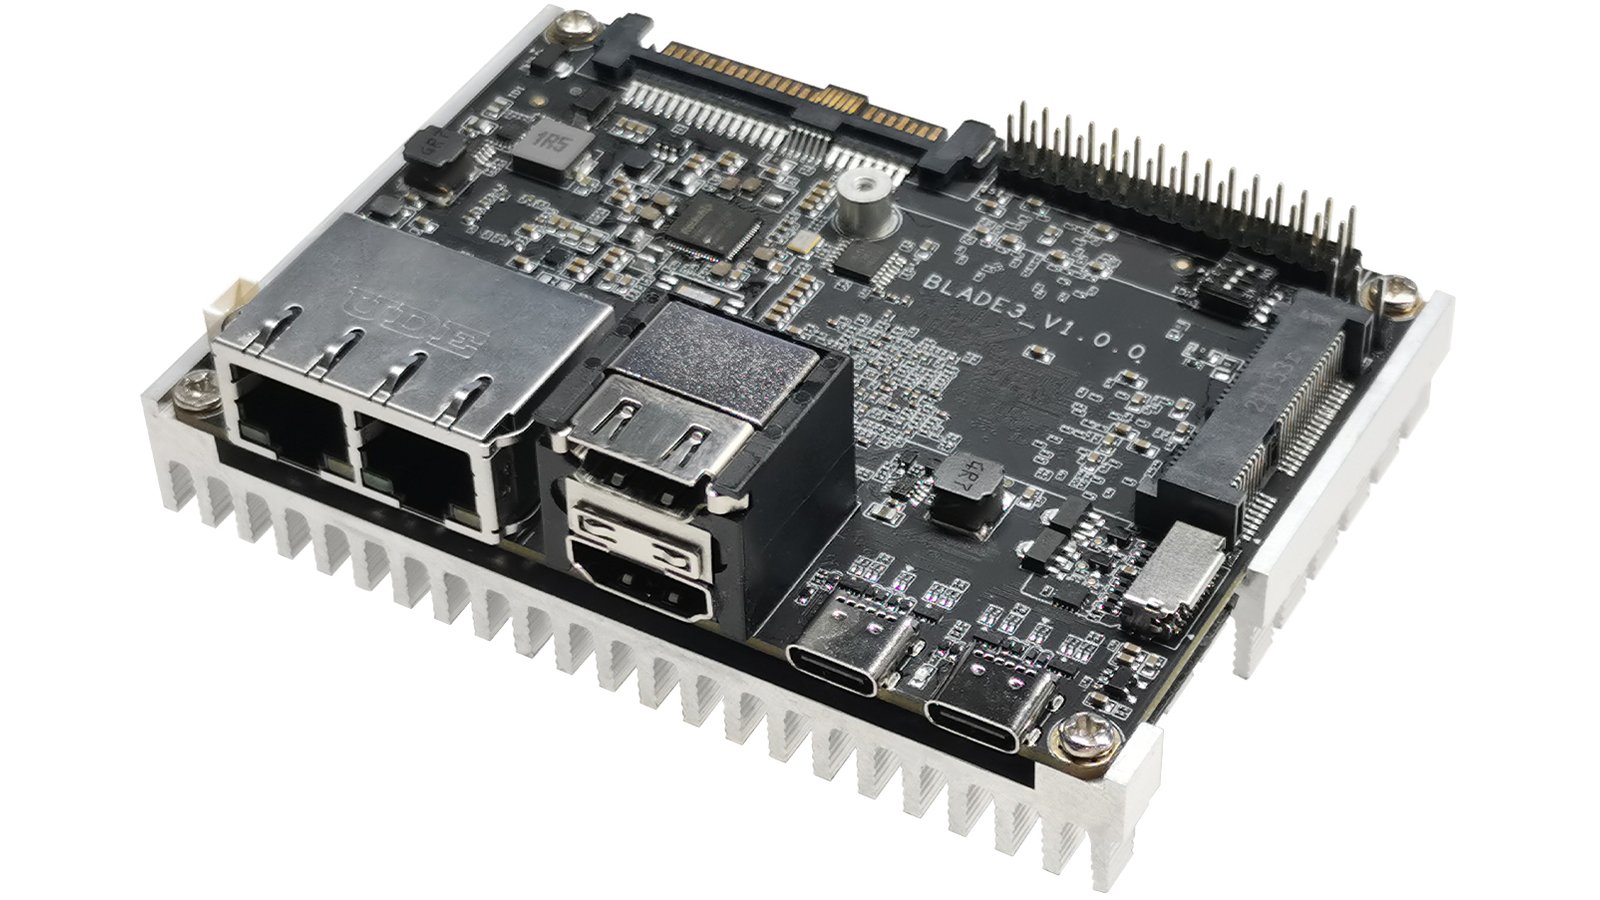 Eight-Core Mixtile Blade 3 is a High-performance Pico-ITX Single-Board Computer